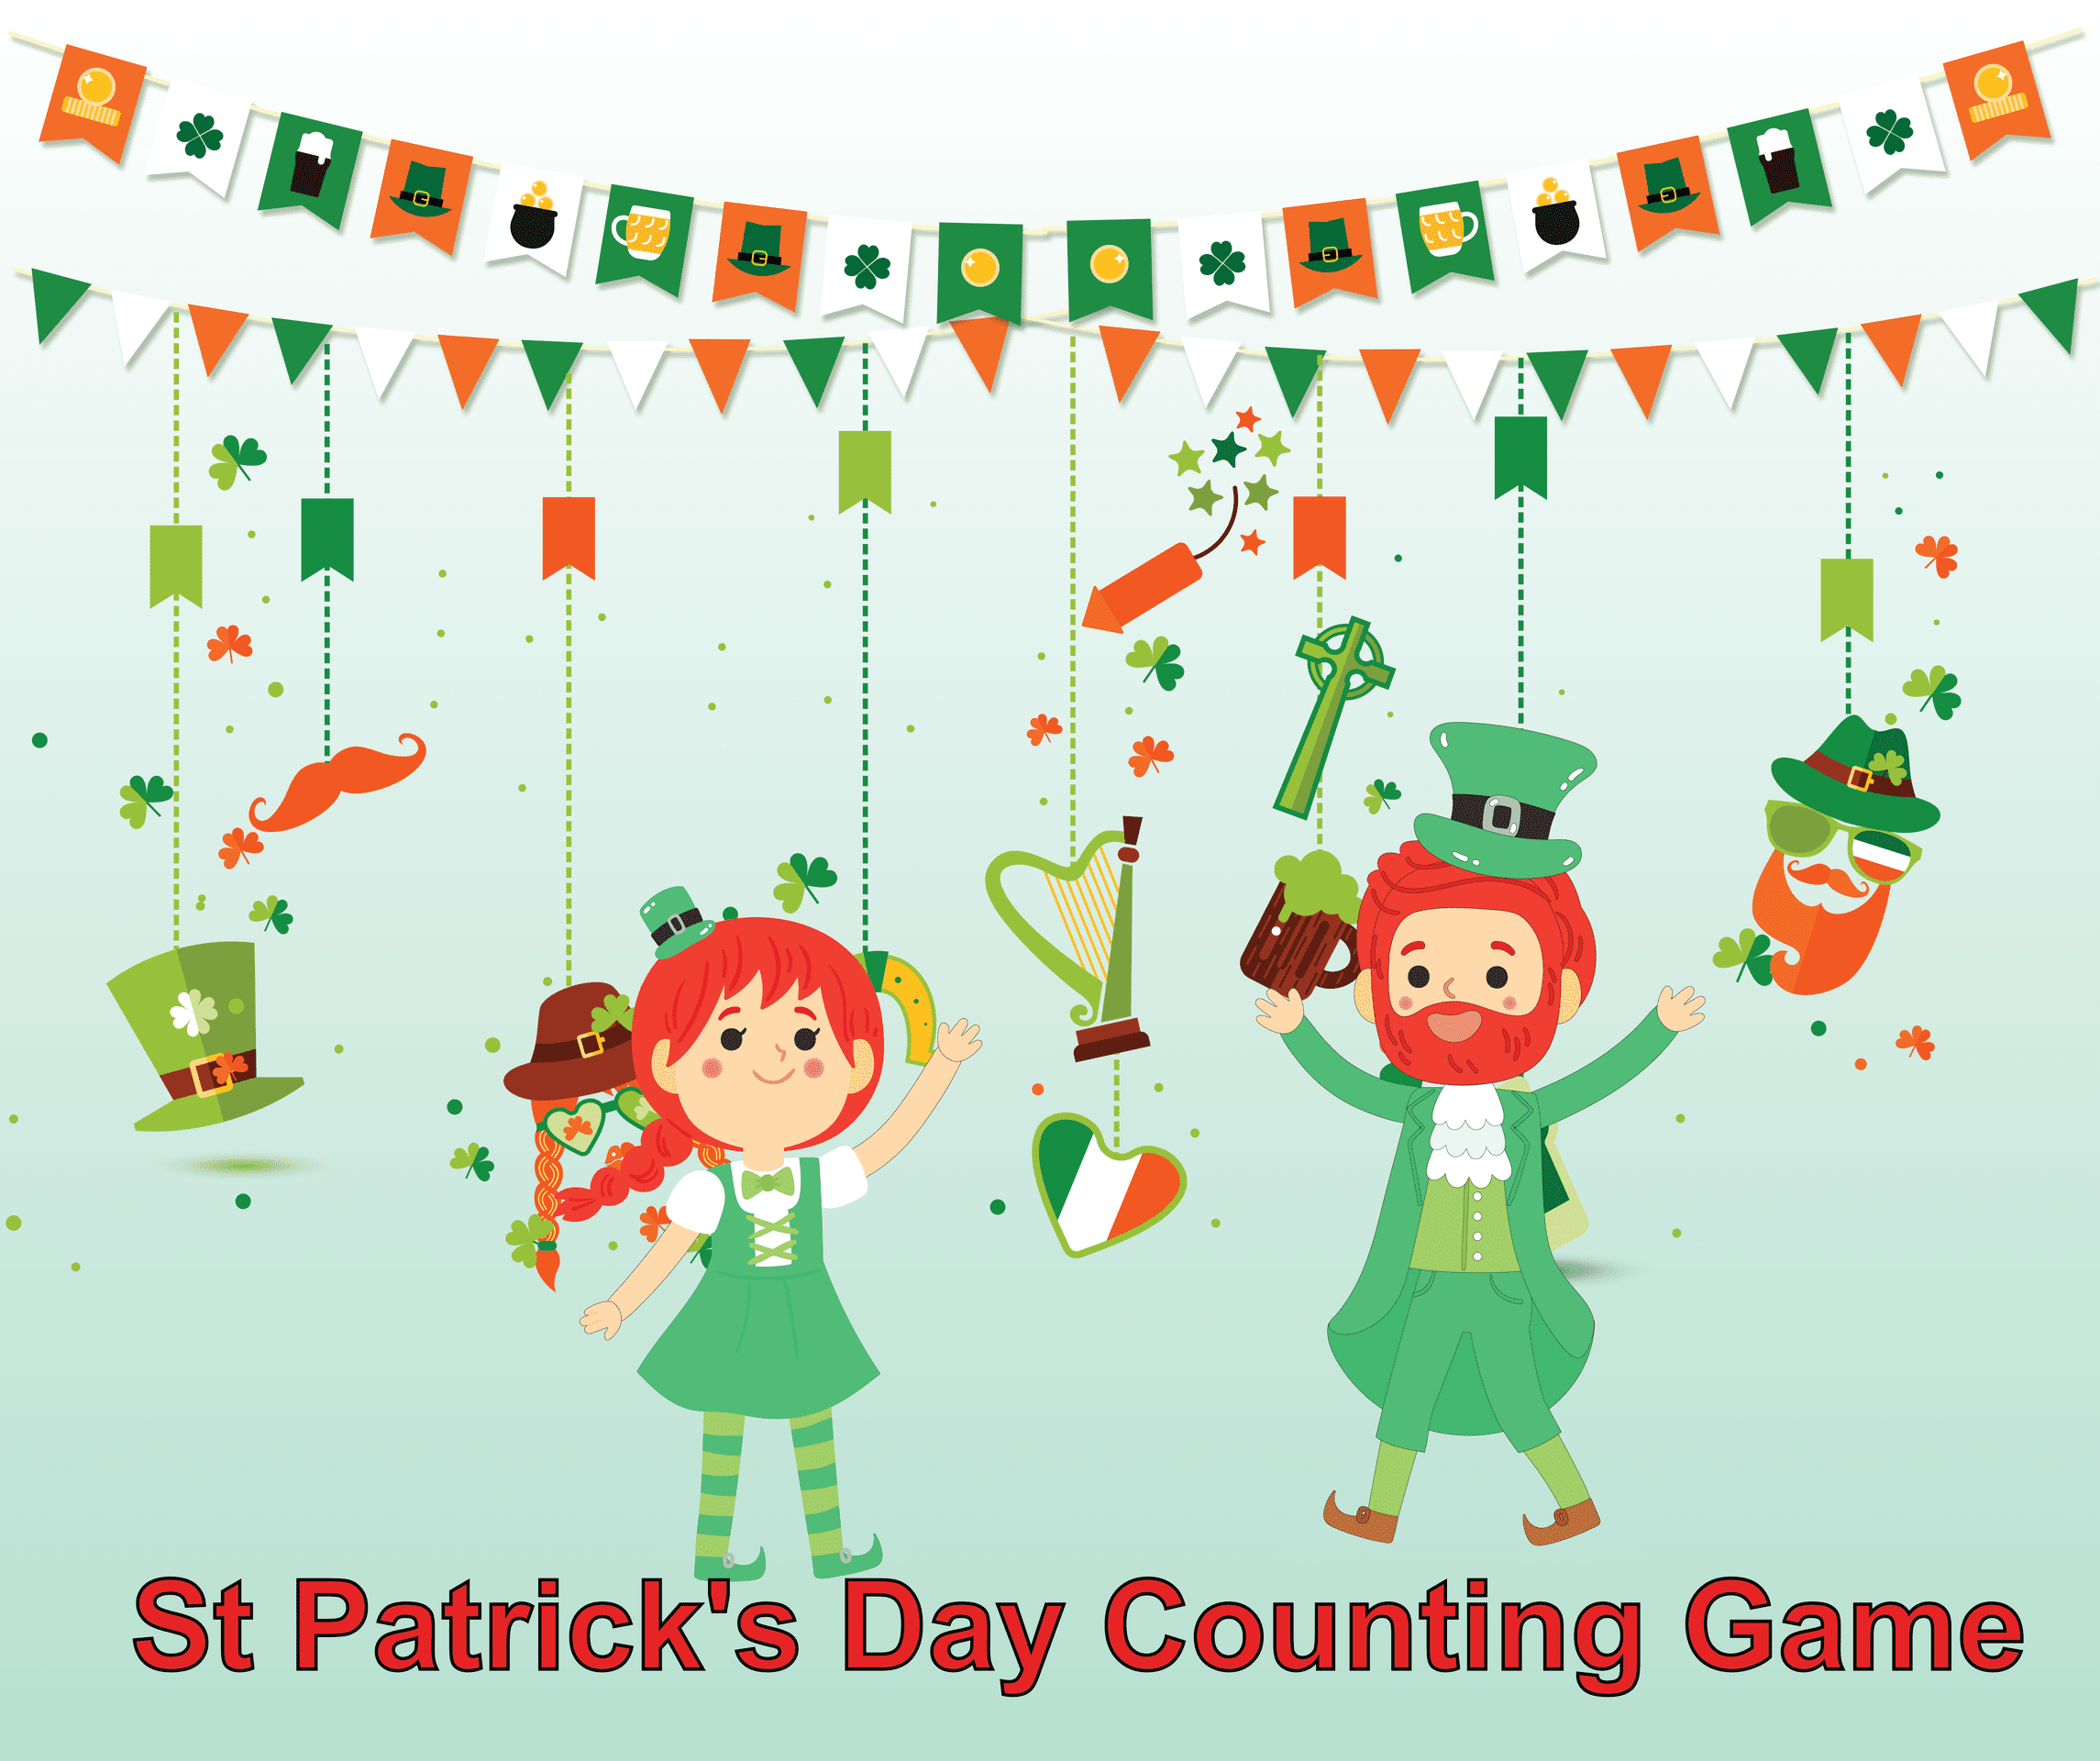 Two guys arranging St. Patrick's day Counting Game